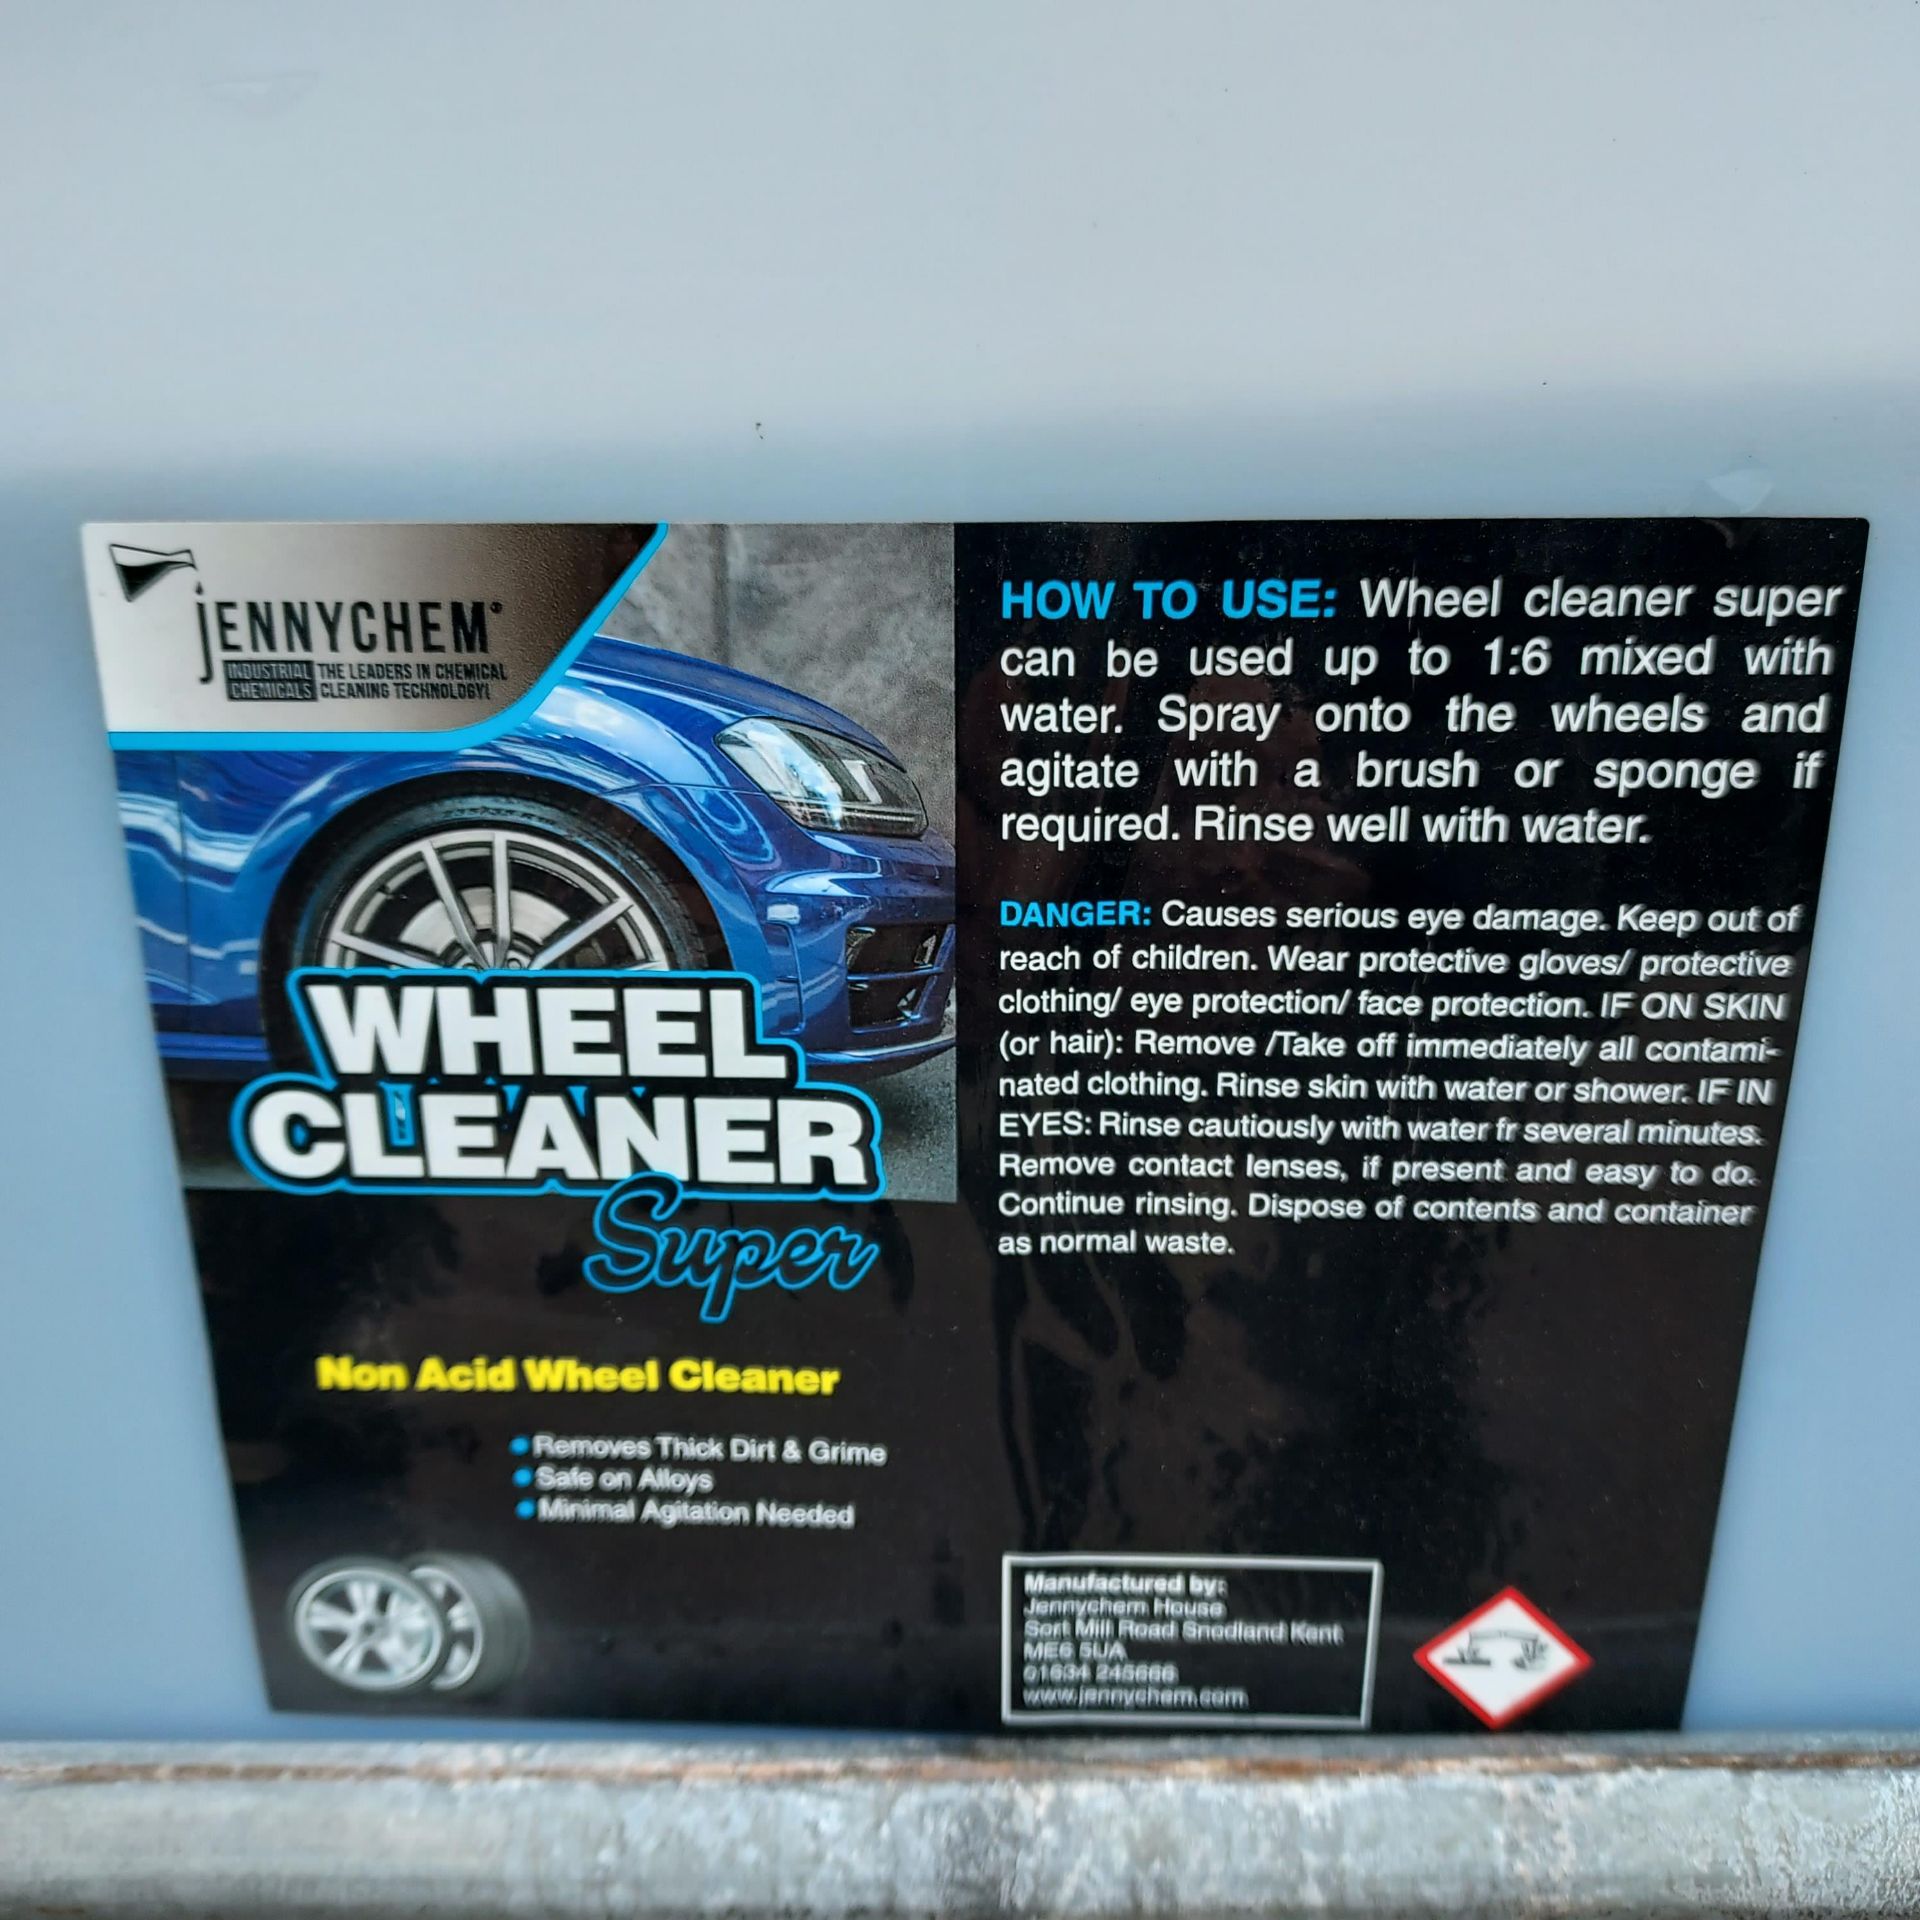 1000 LITRE BRAND NEW NON ACID SUPER WHEEL CLEANER - REMOVES THICK DIRT AND GRIME - SAFE ON - Image 2 of 2